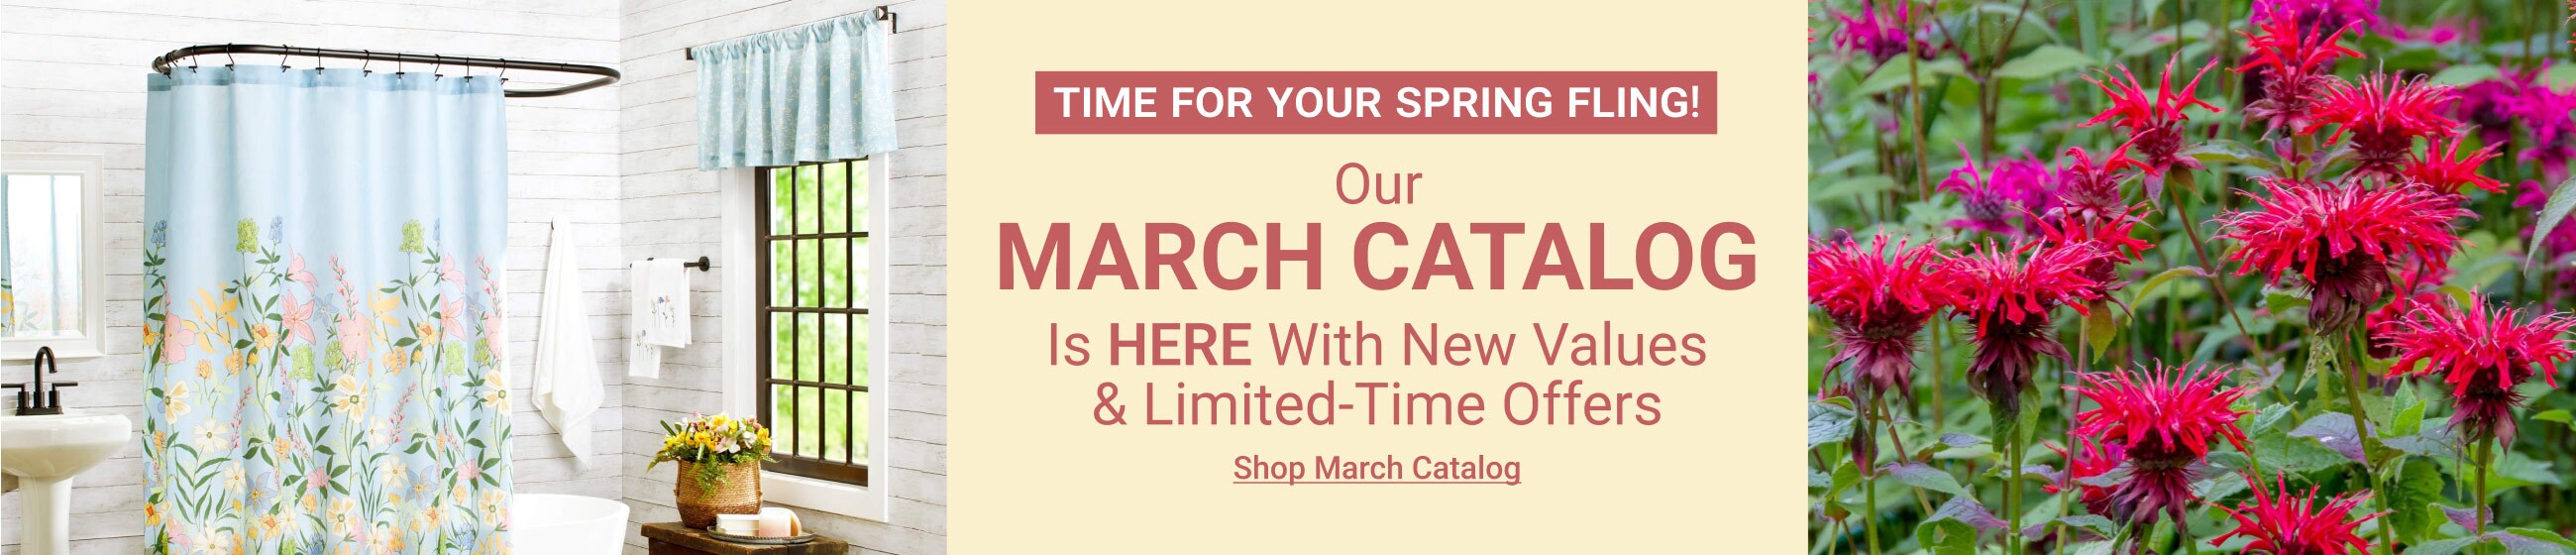 Our March catalog is here - Shop Now!